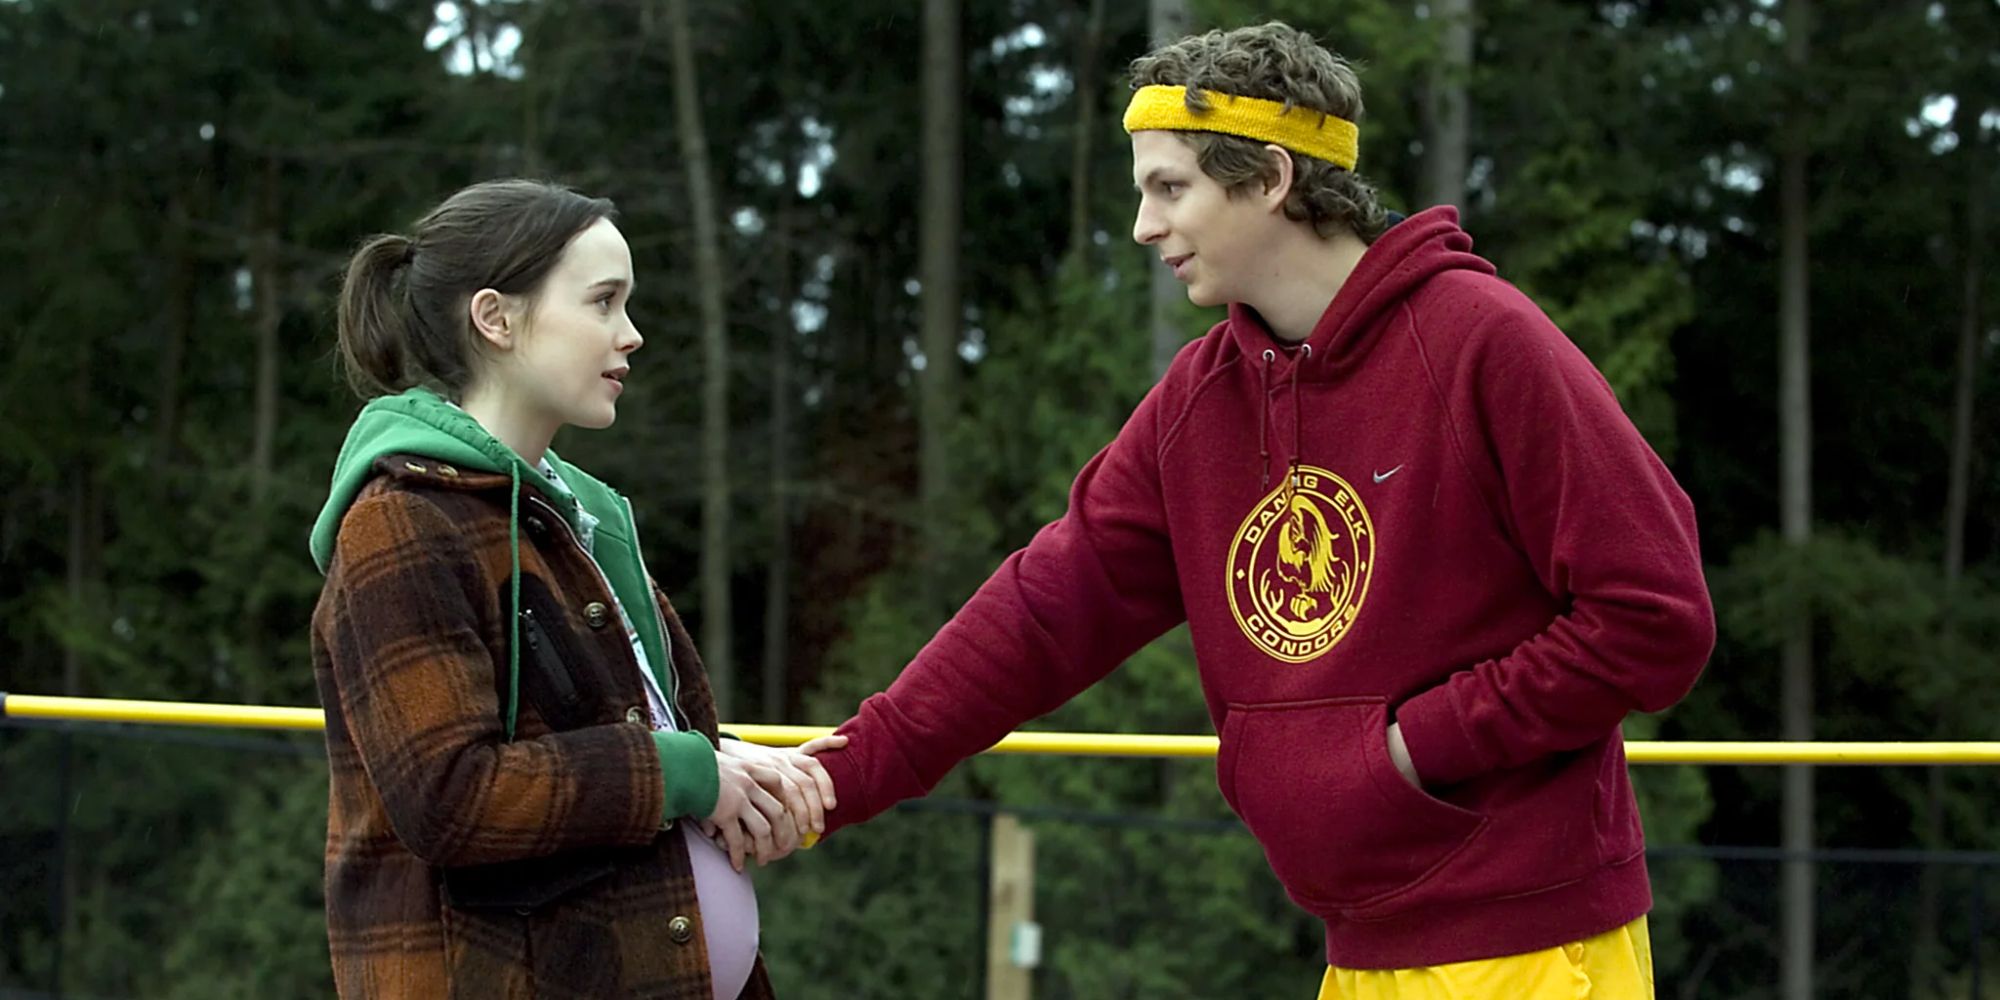 Juno presses Paulie's hand against her stomach in Juno.